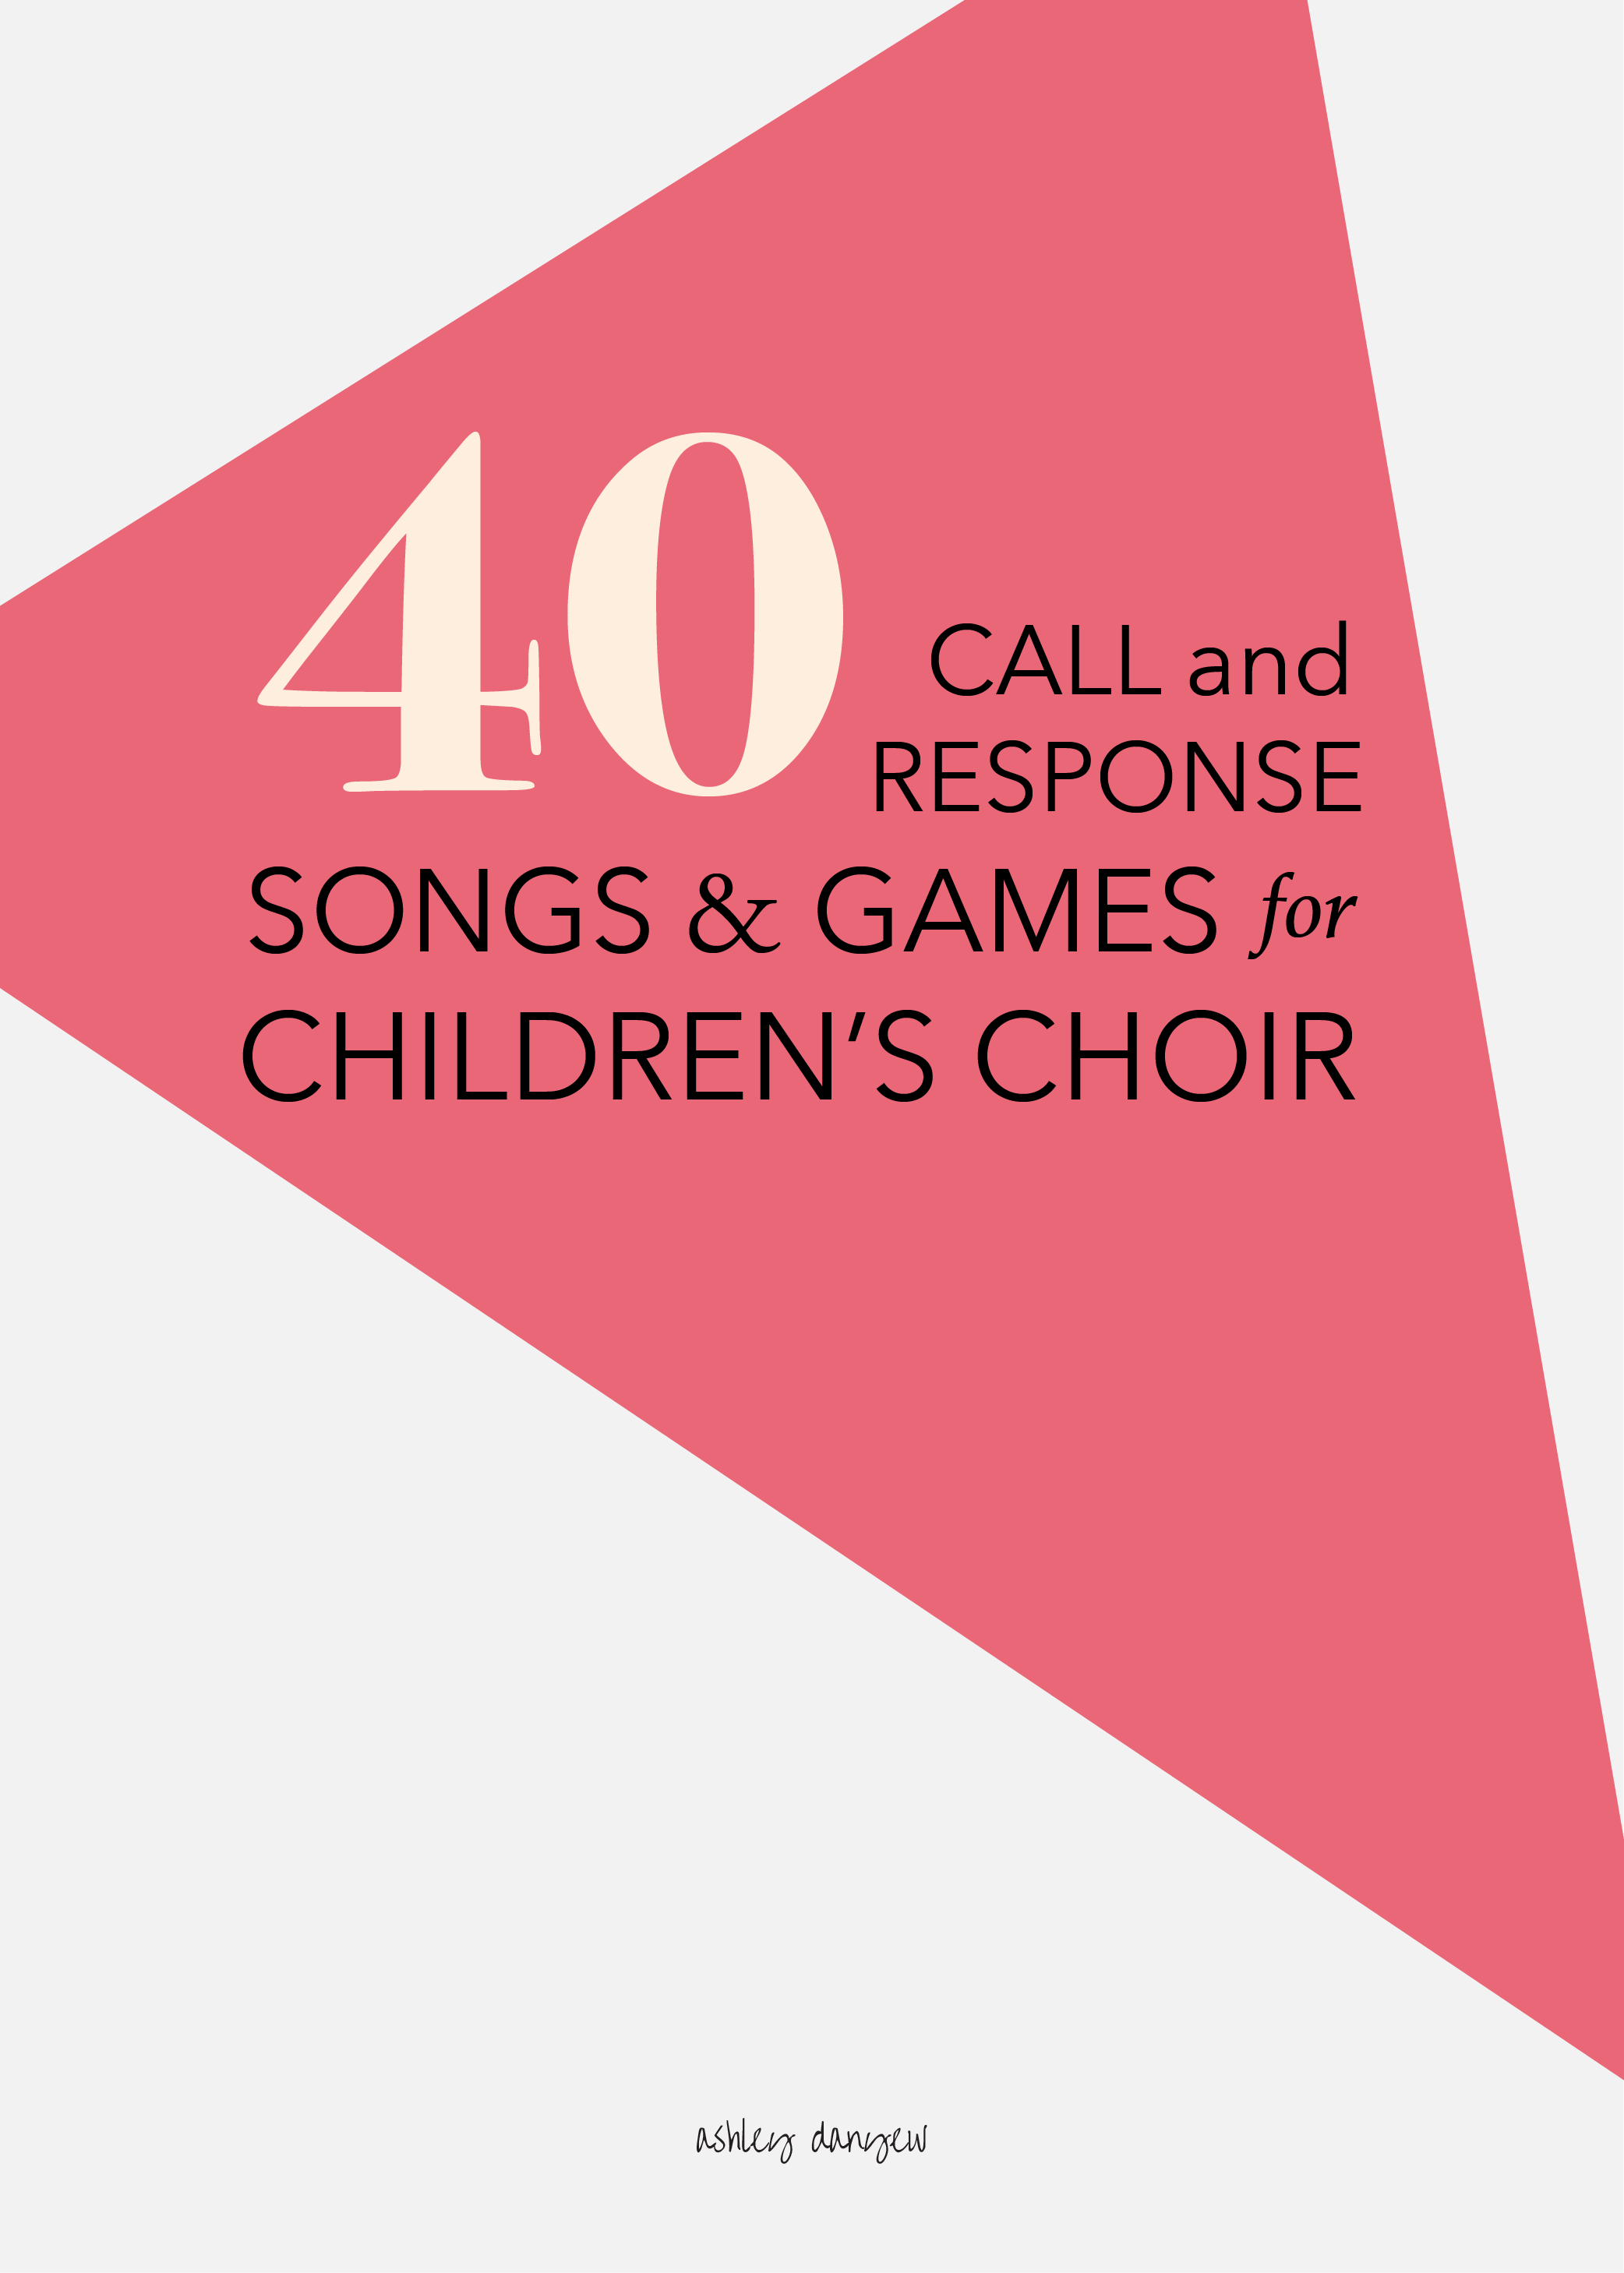 40 Call & Response Songs and Games for Children's Choir